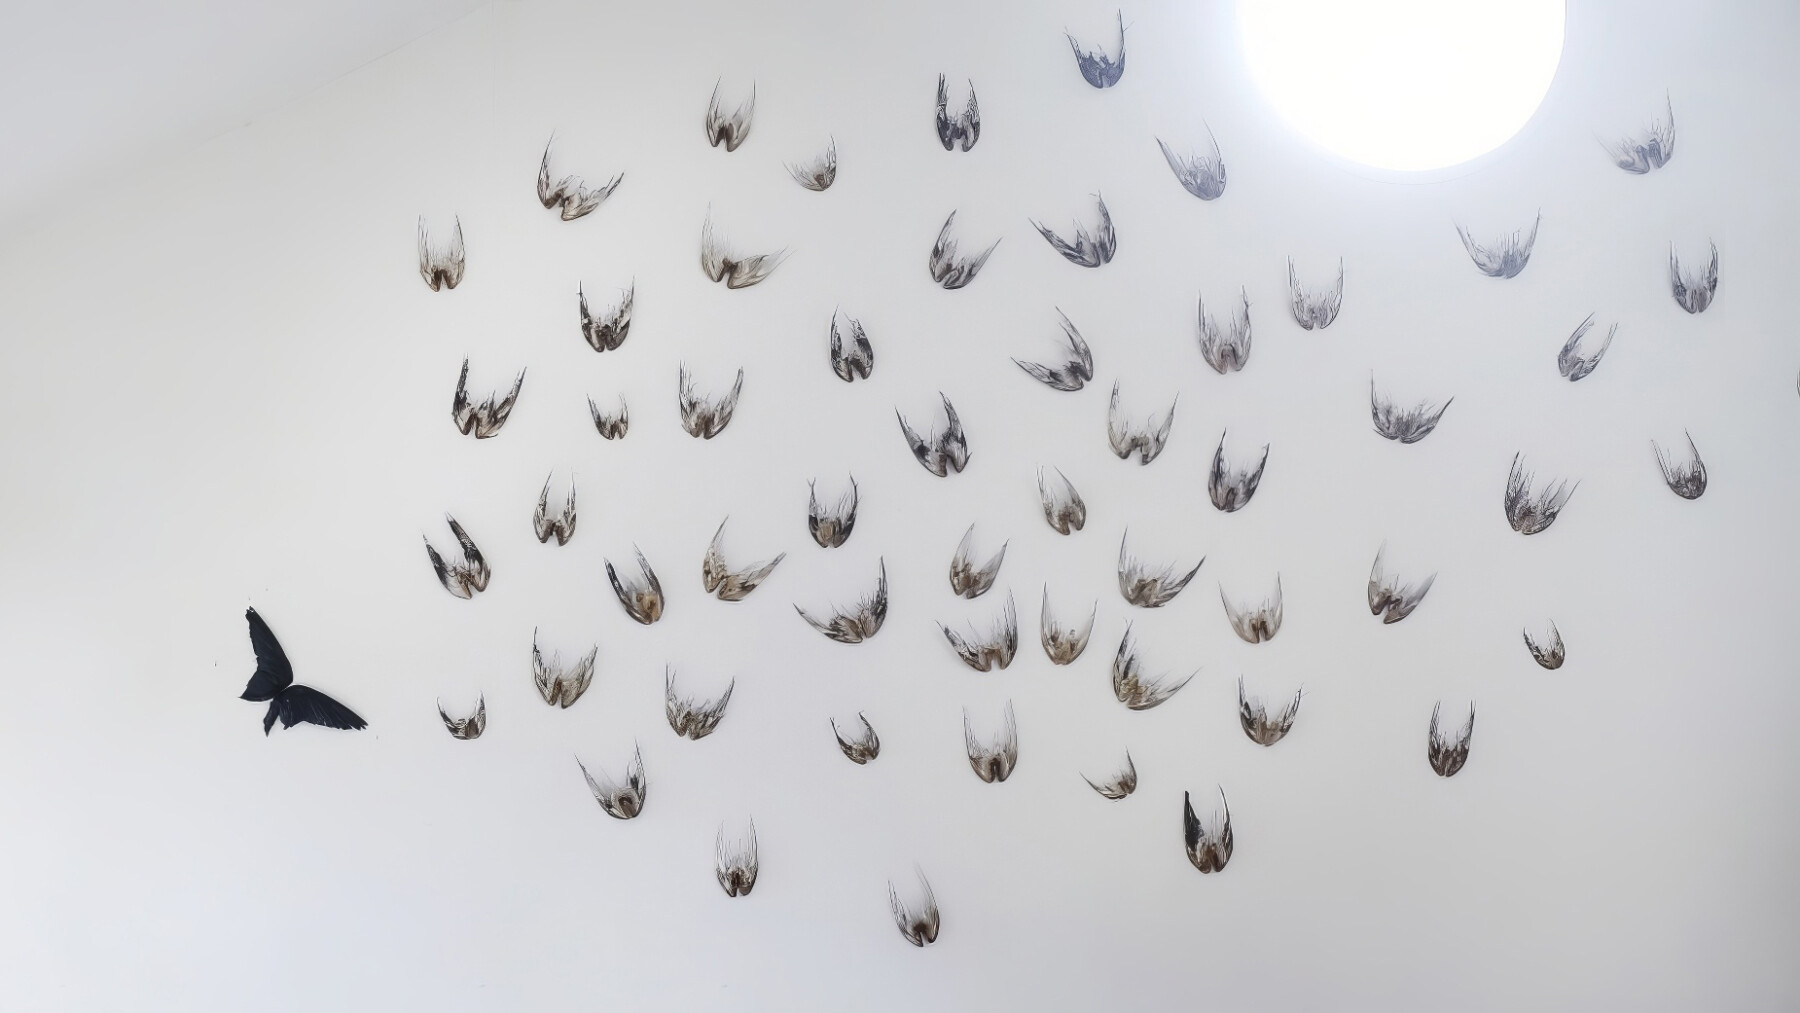 Dozens of pairs of bird wings are arranged on a white background.